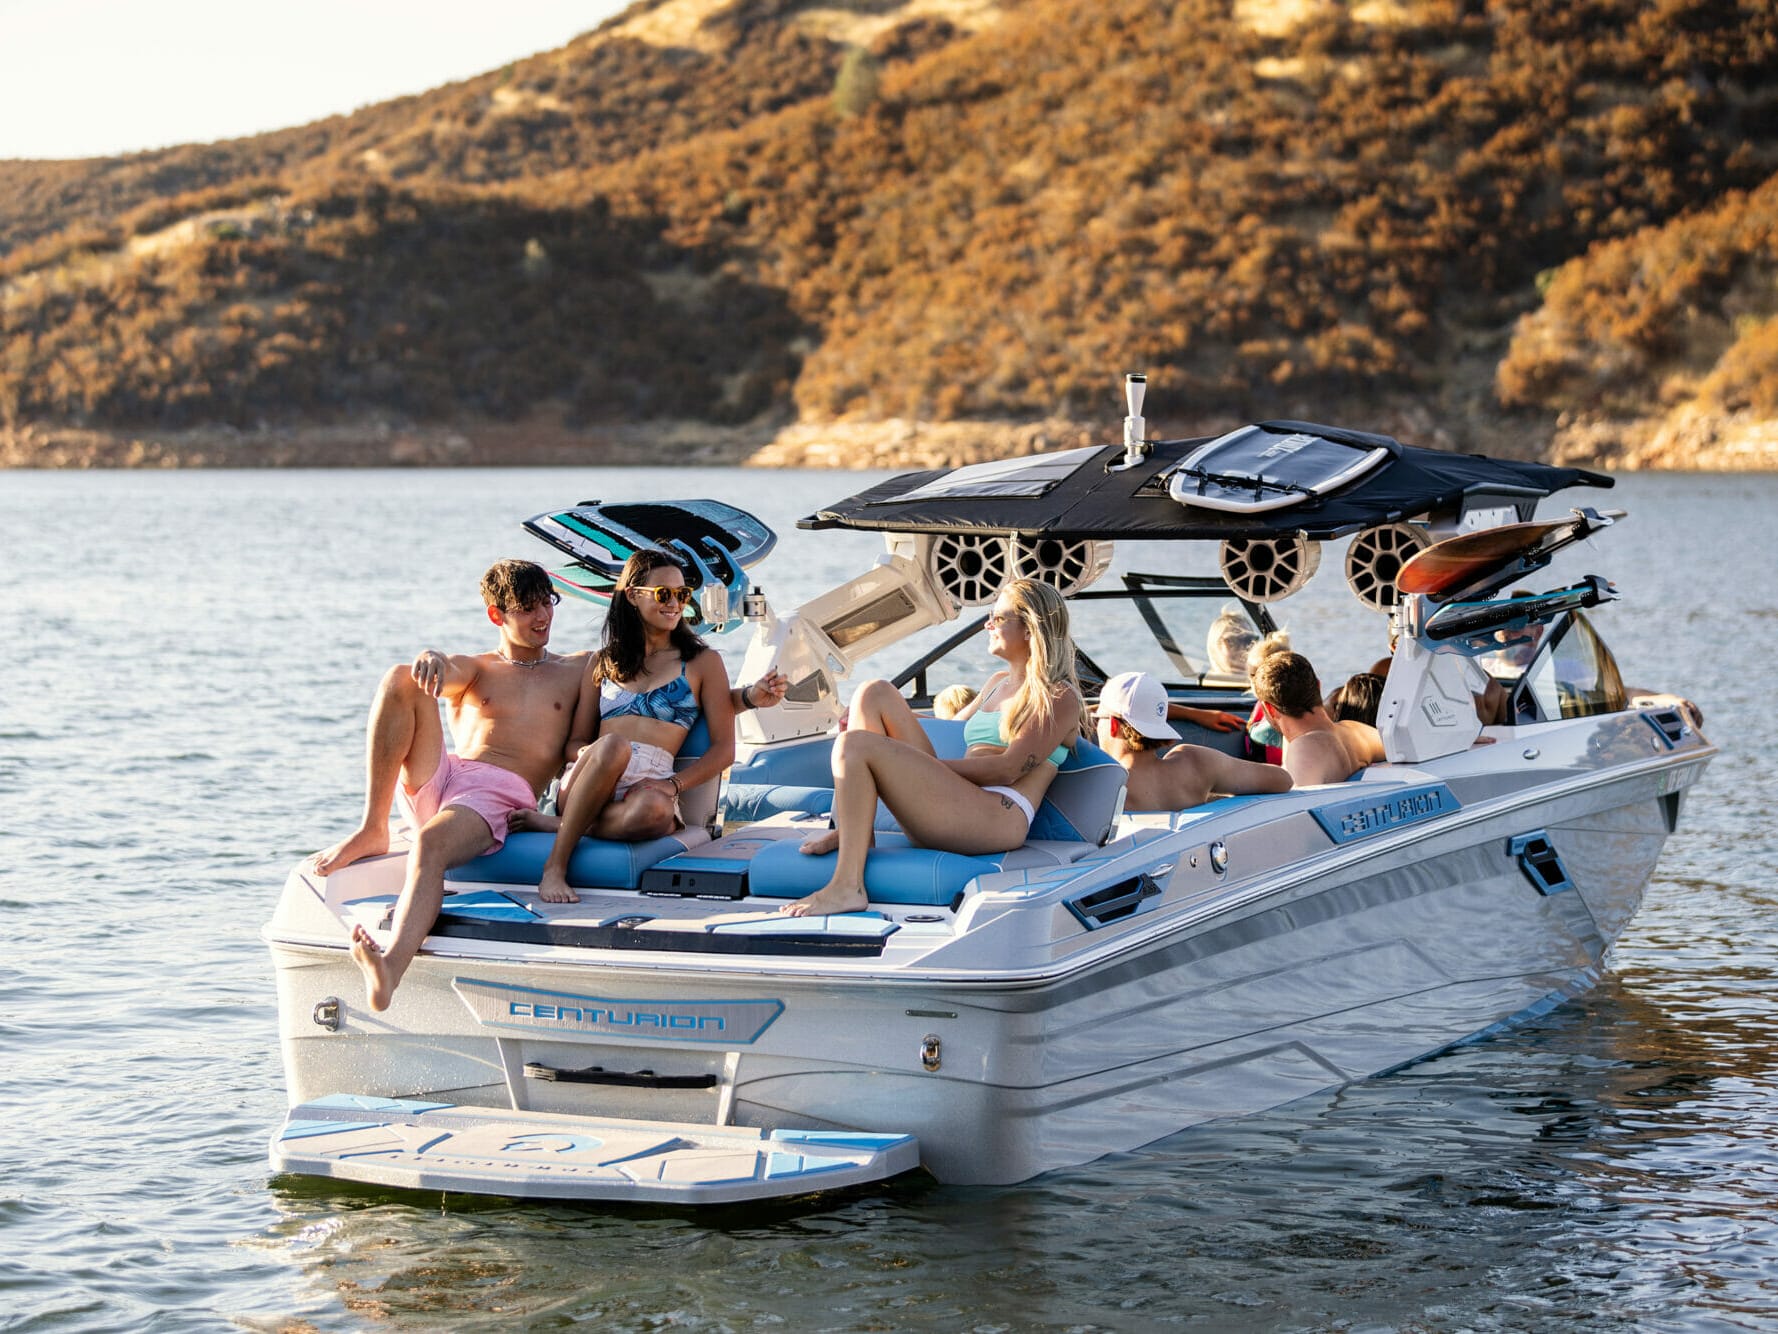 A group of people riding a wakesurf board on a wakeboat.